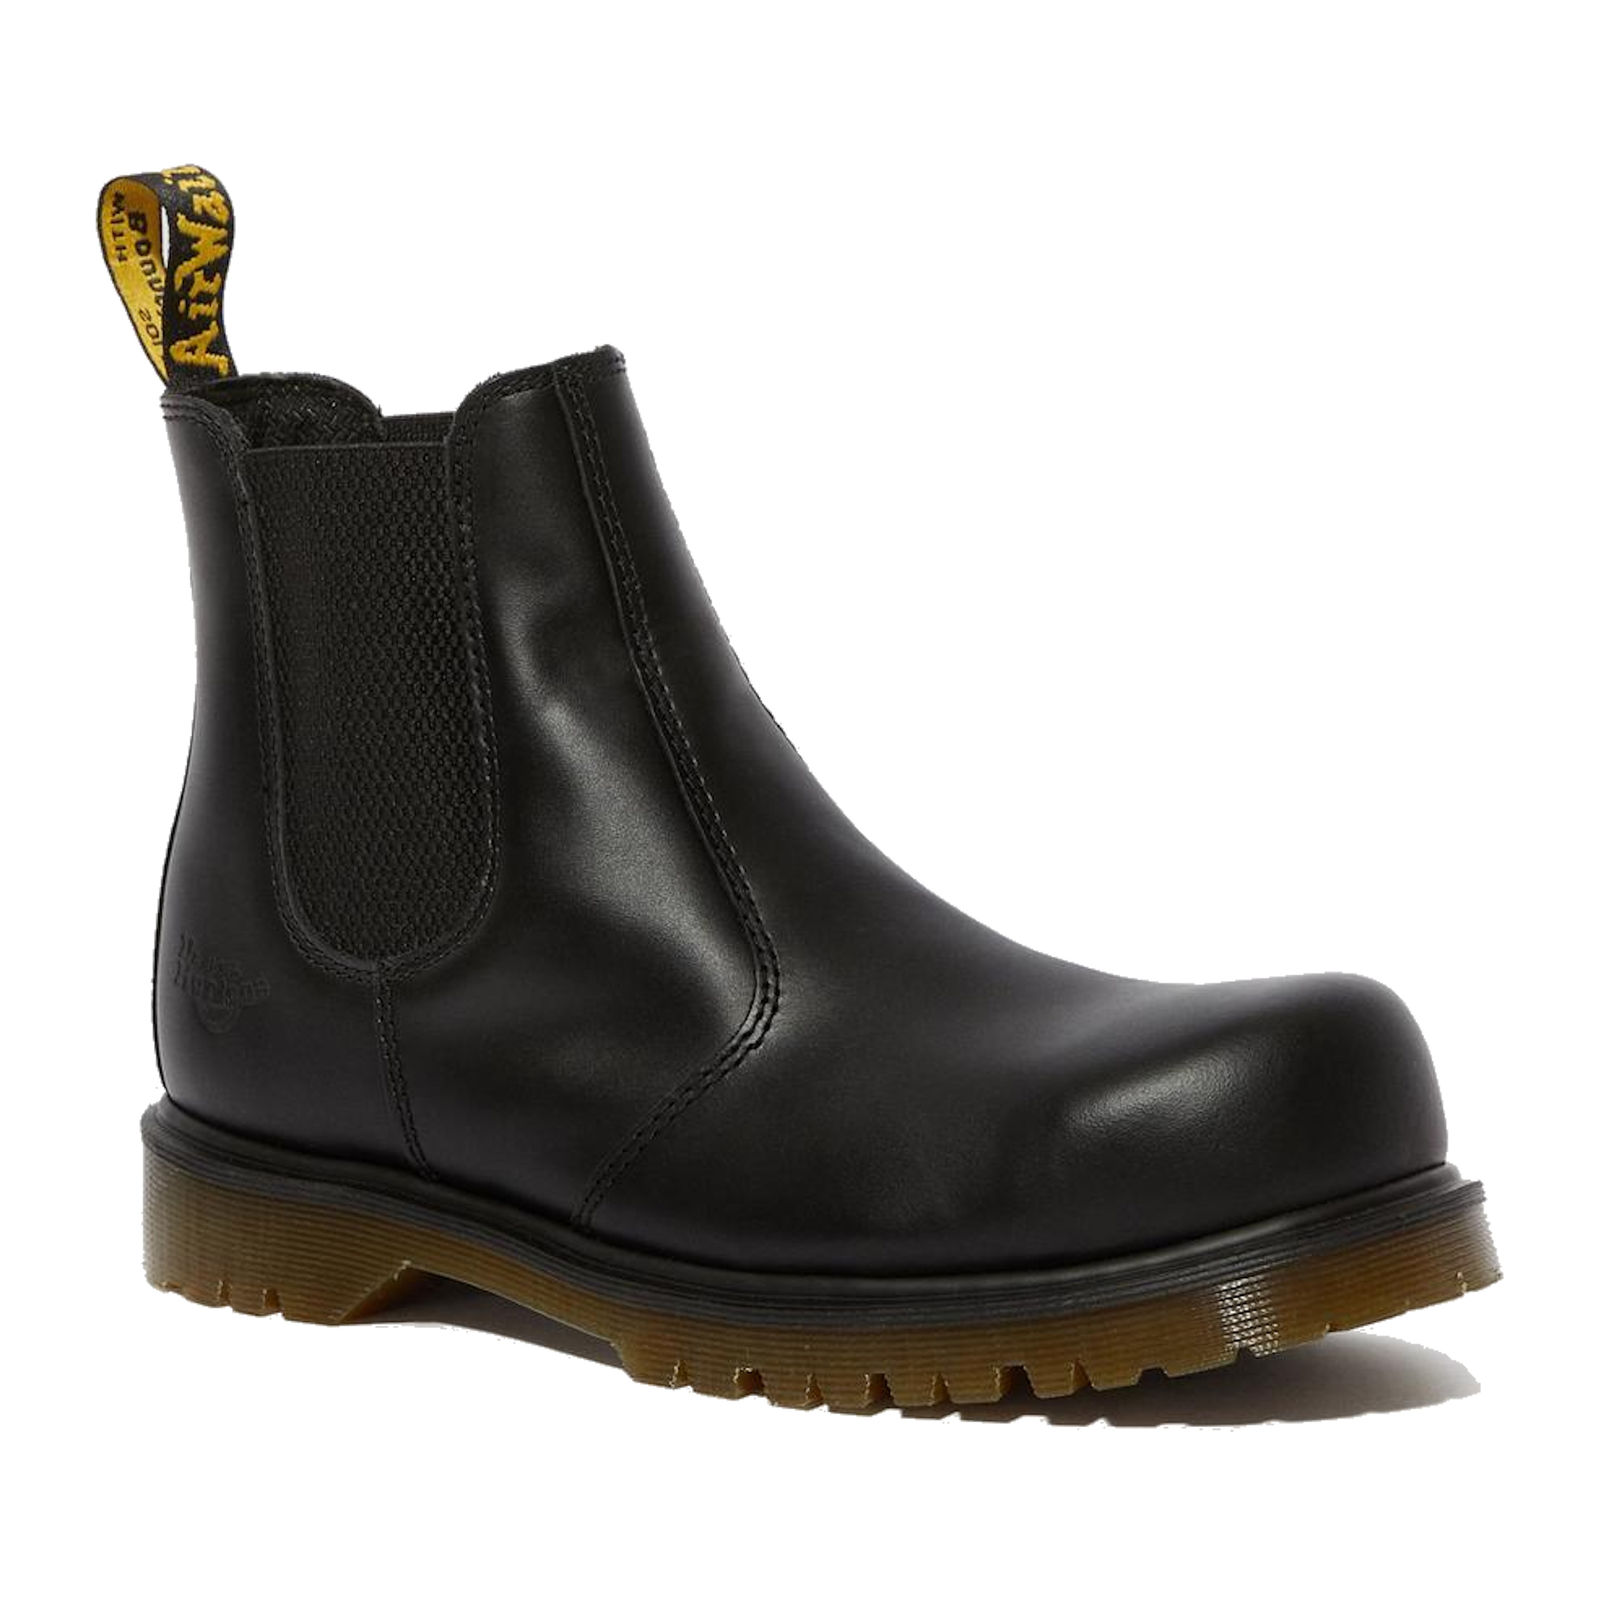 Dr. Martens Steel Toe Cap Safety Boots: Perfect Protection